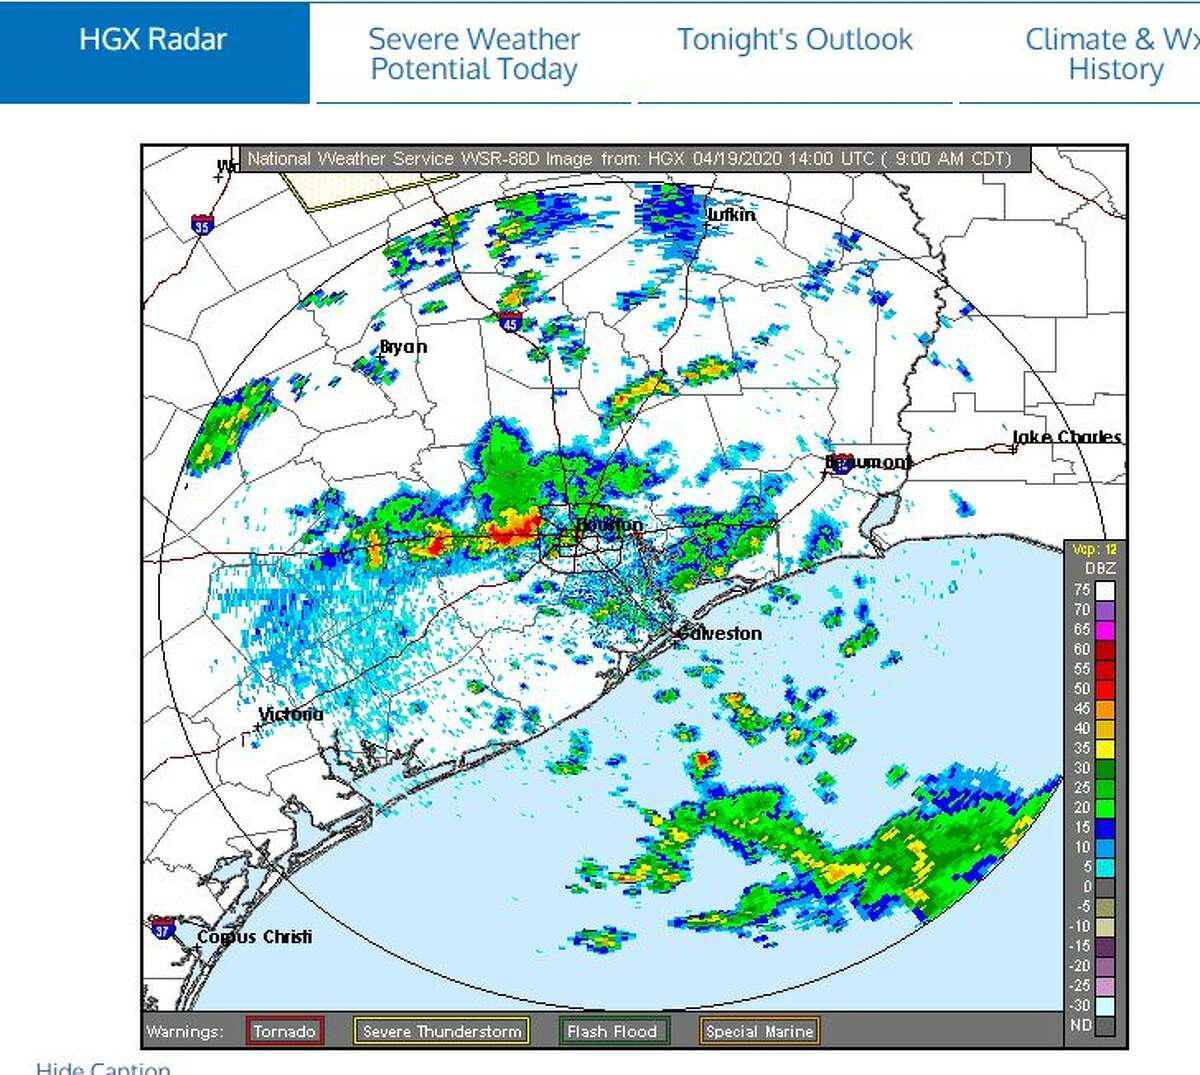 Tornado watch extended to 10 p.m. Sunday for Houston